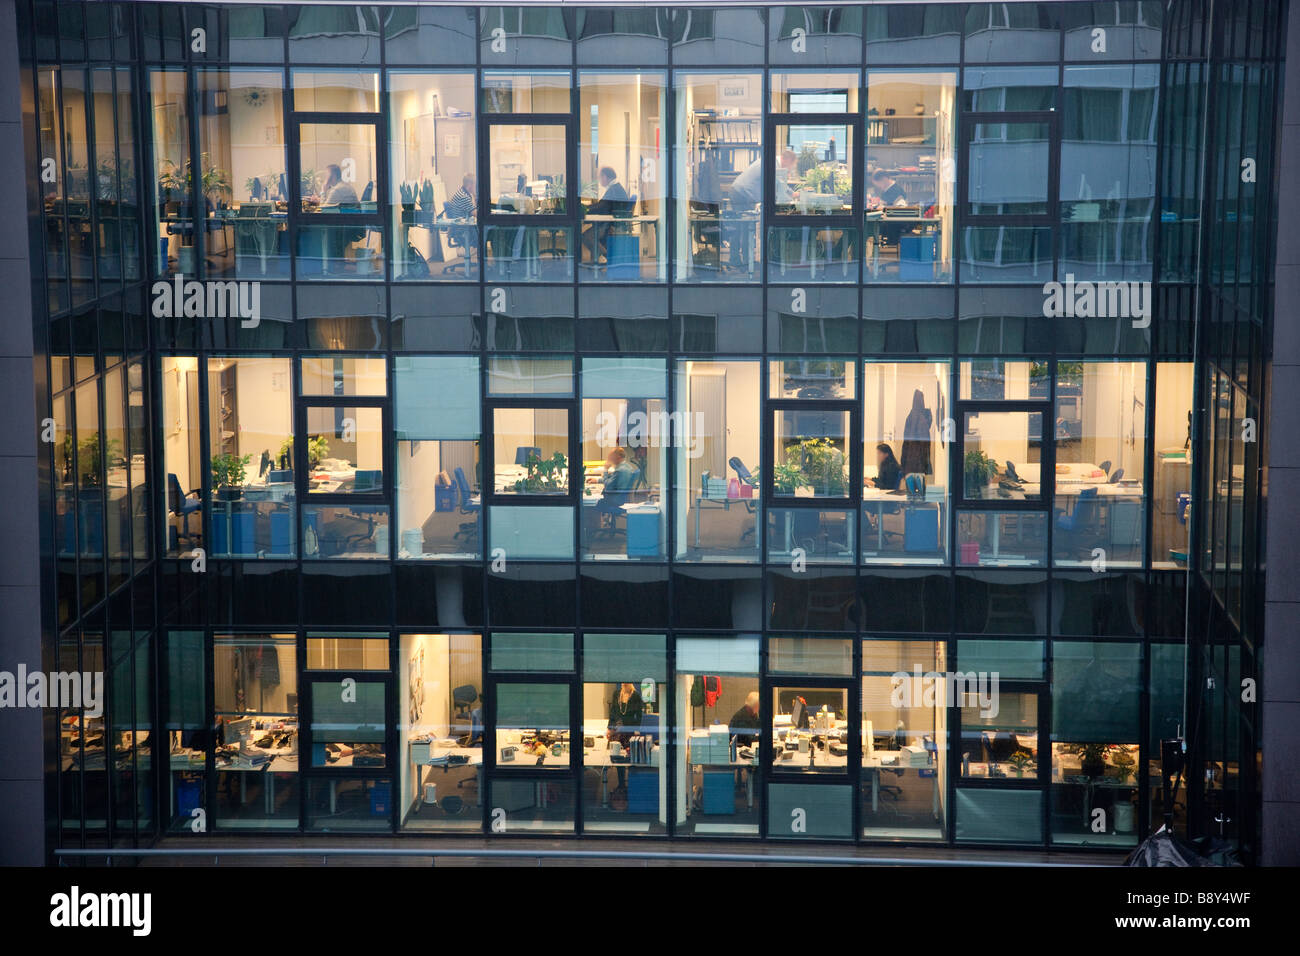 Modern office building people working late Stock Photo